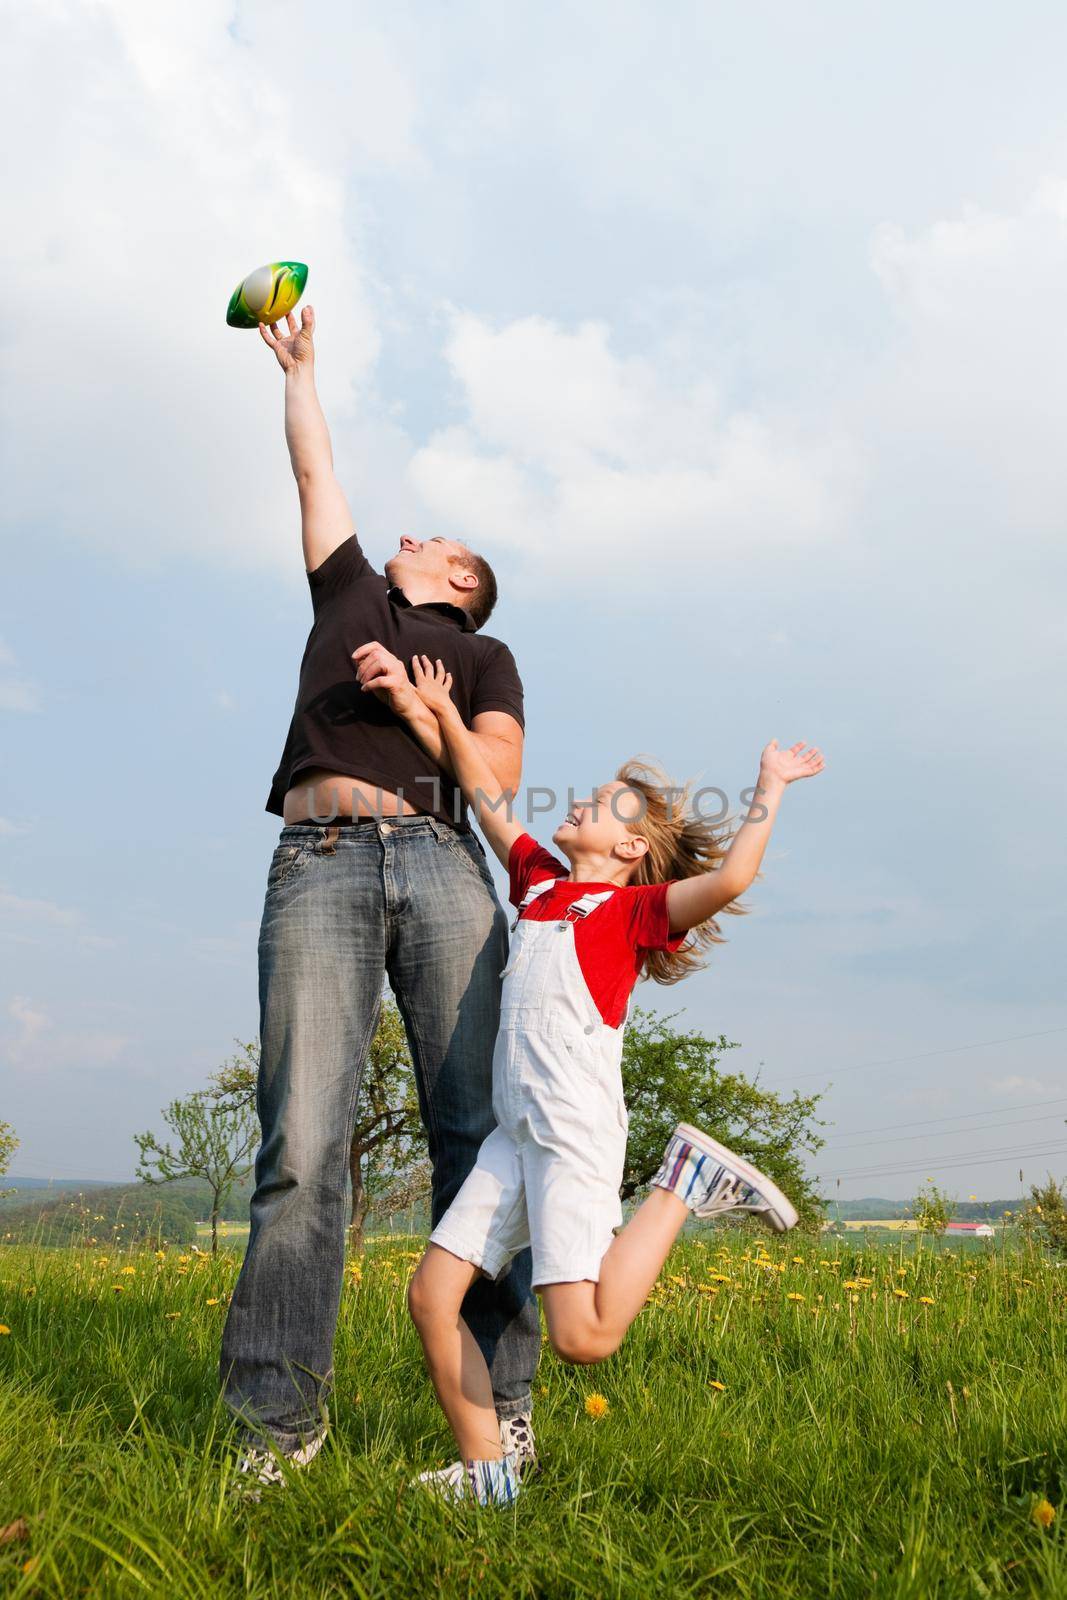 Father and daughter catching the ball by Kzenon